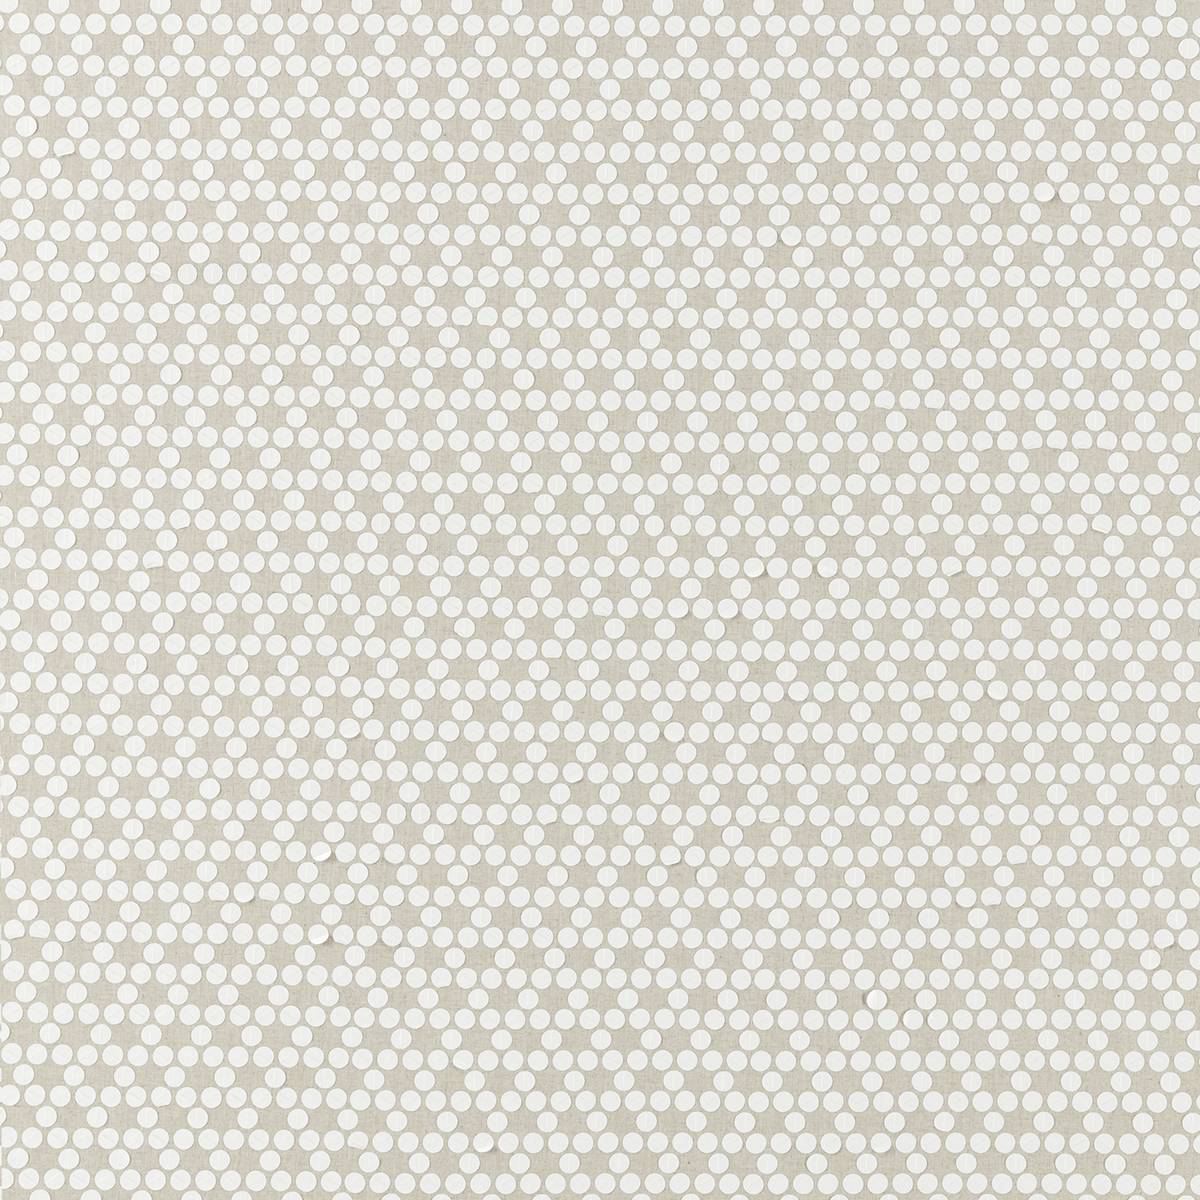 Lunette Jute Fabric by Harlequin